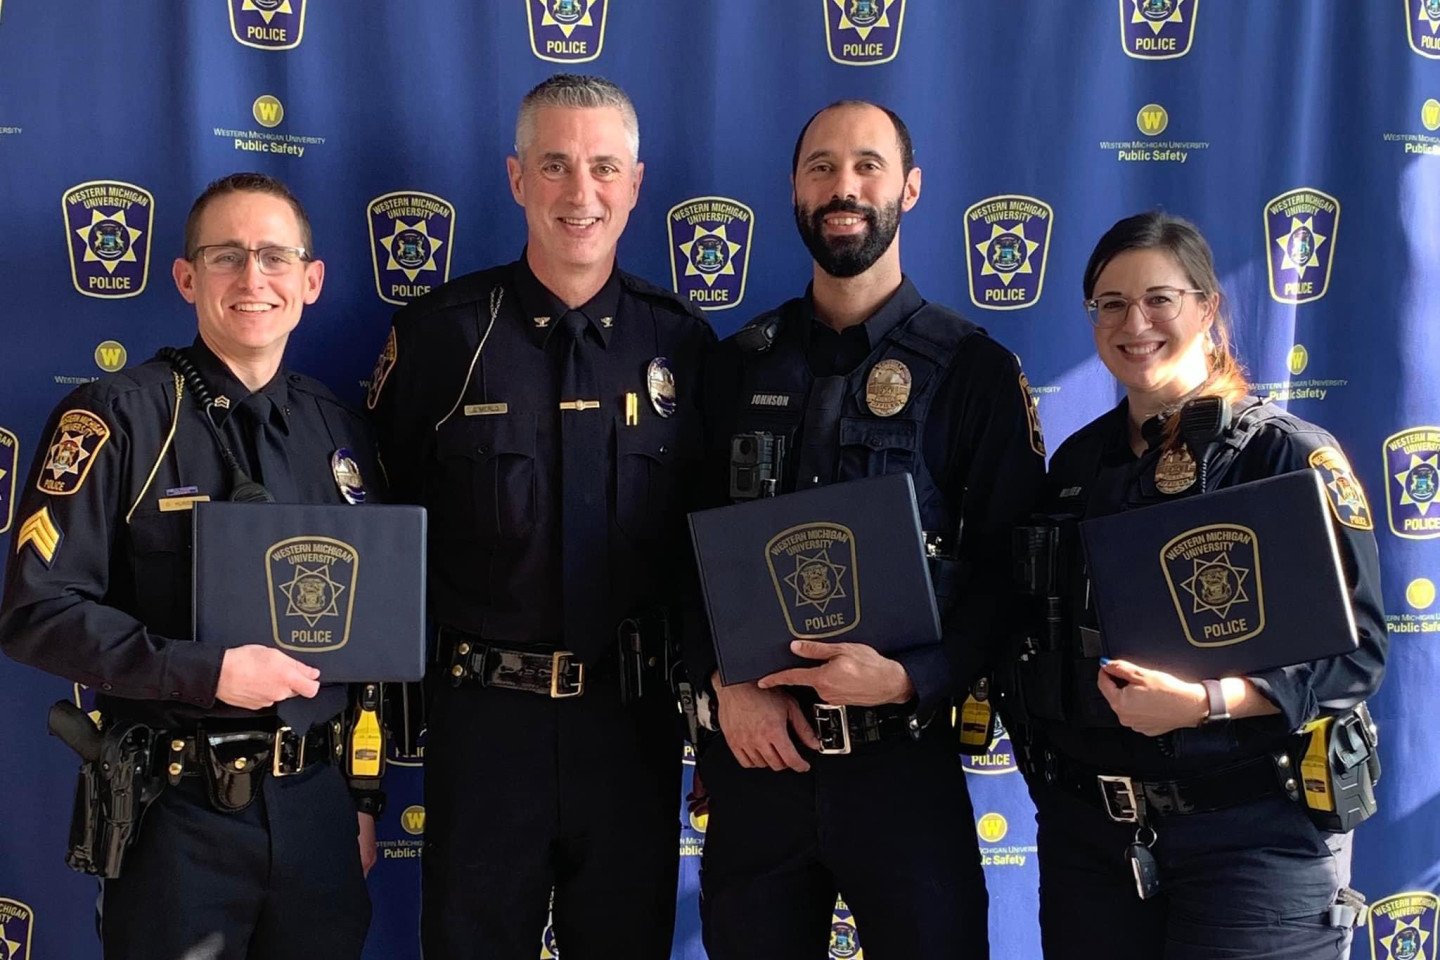 WMU DPS Chief Scott Merlo (second from left) with (from left to right) Sergeant Dustin Hubbell, Officer Charles Johnson and Officer Sara Helmer